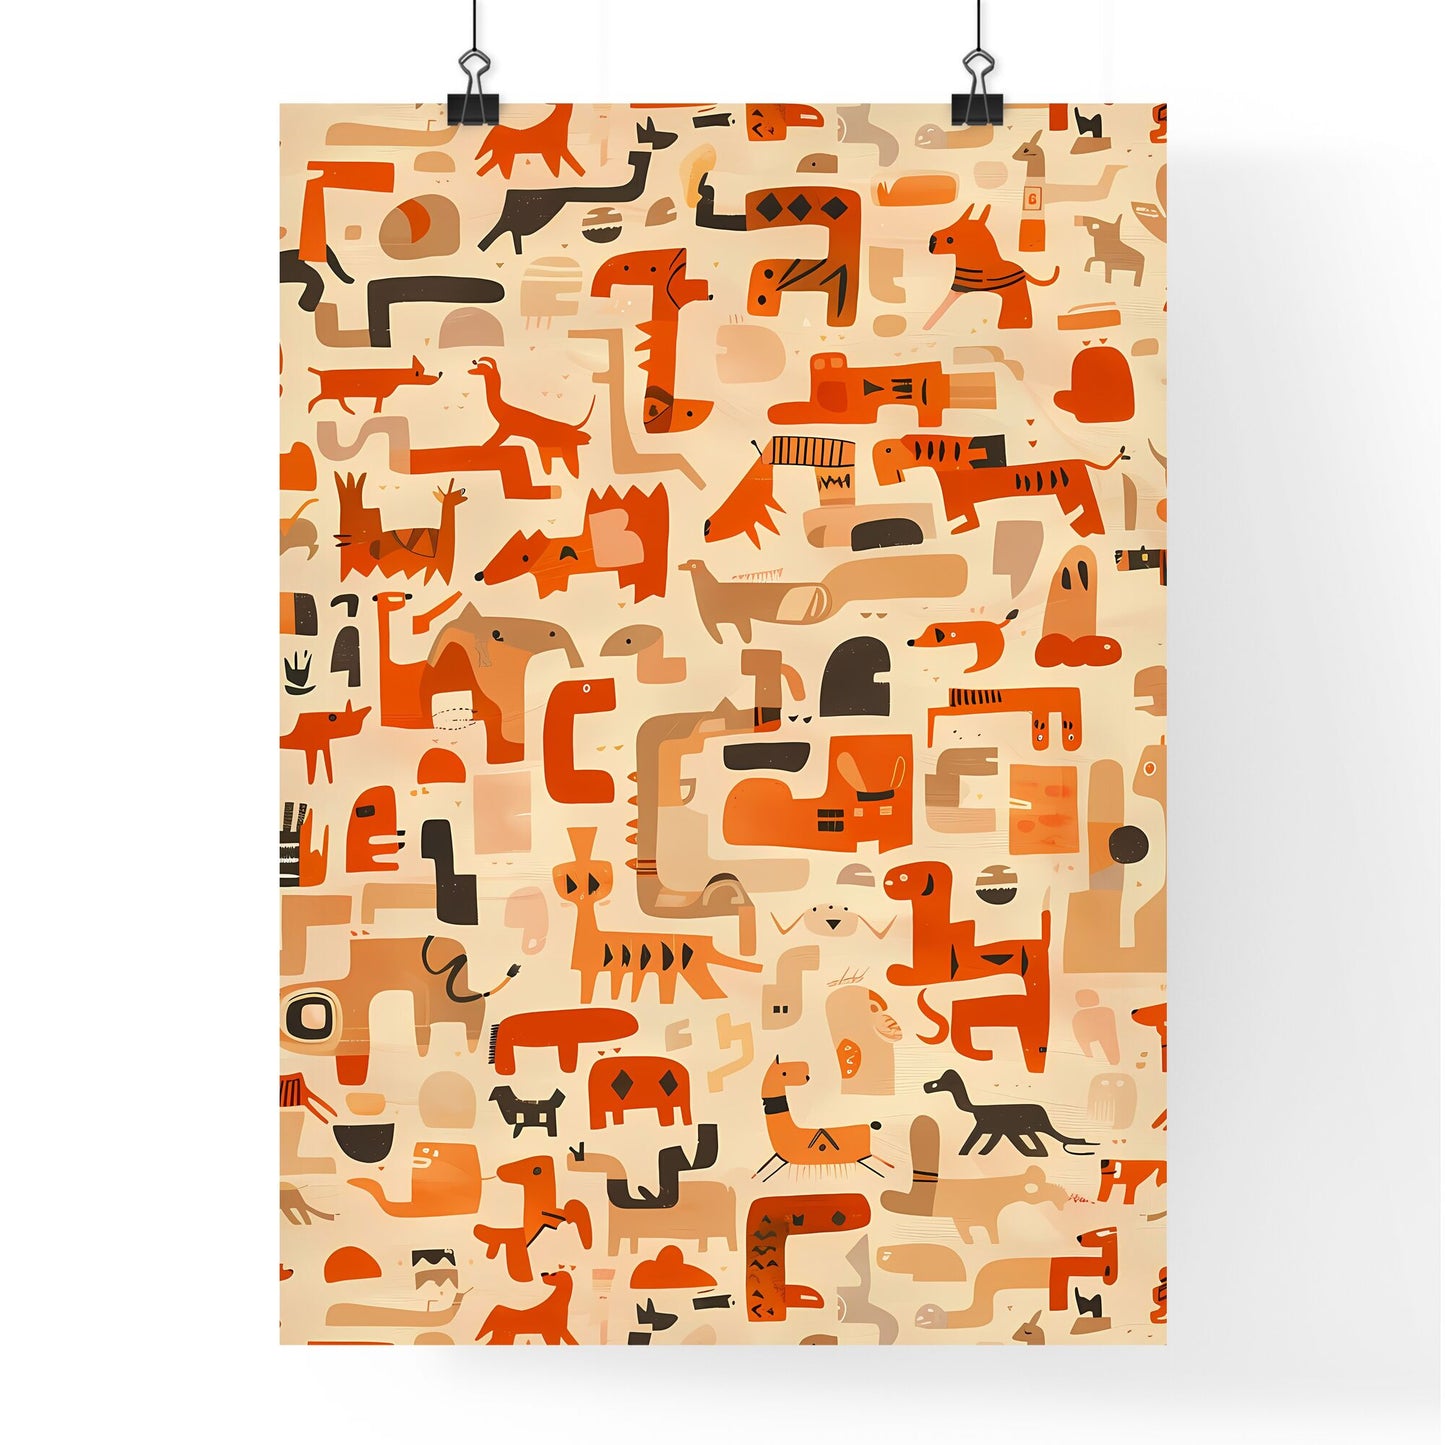 Minimalist Abstract Pattern with Dog Figures, Mesoamerican Influences, Textural Explorations, Interactive Artwork Default Title